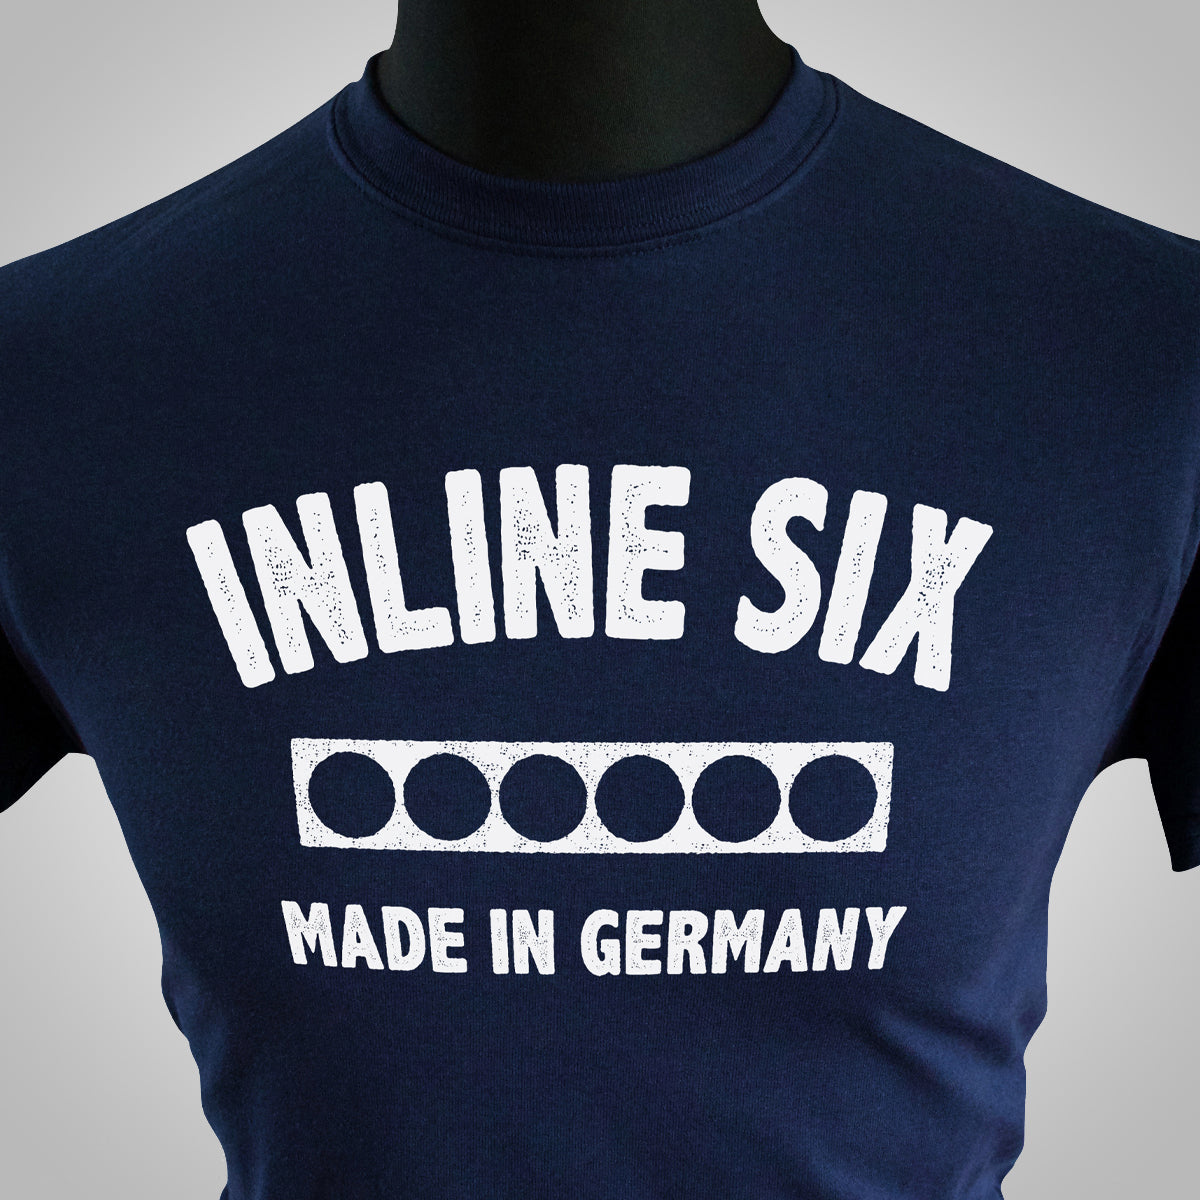 Inline Six Made In Germany T Shirt (Colour Options)